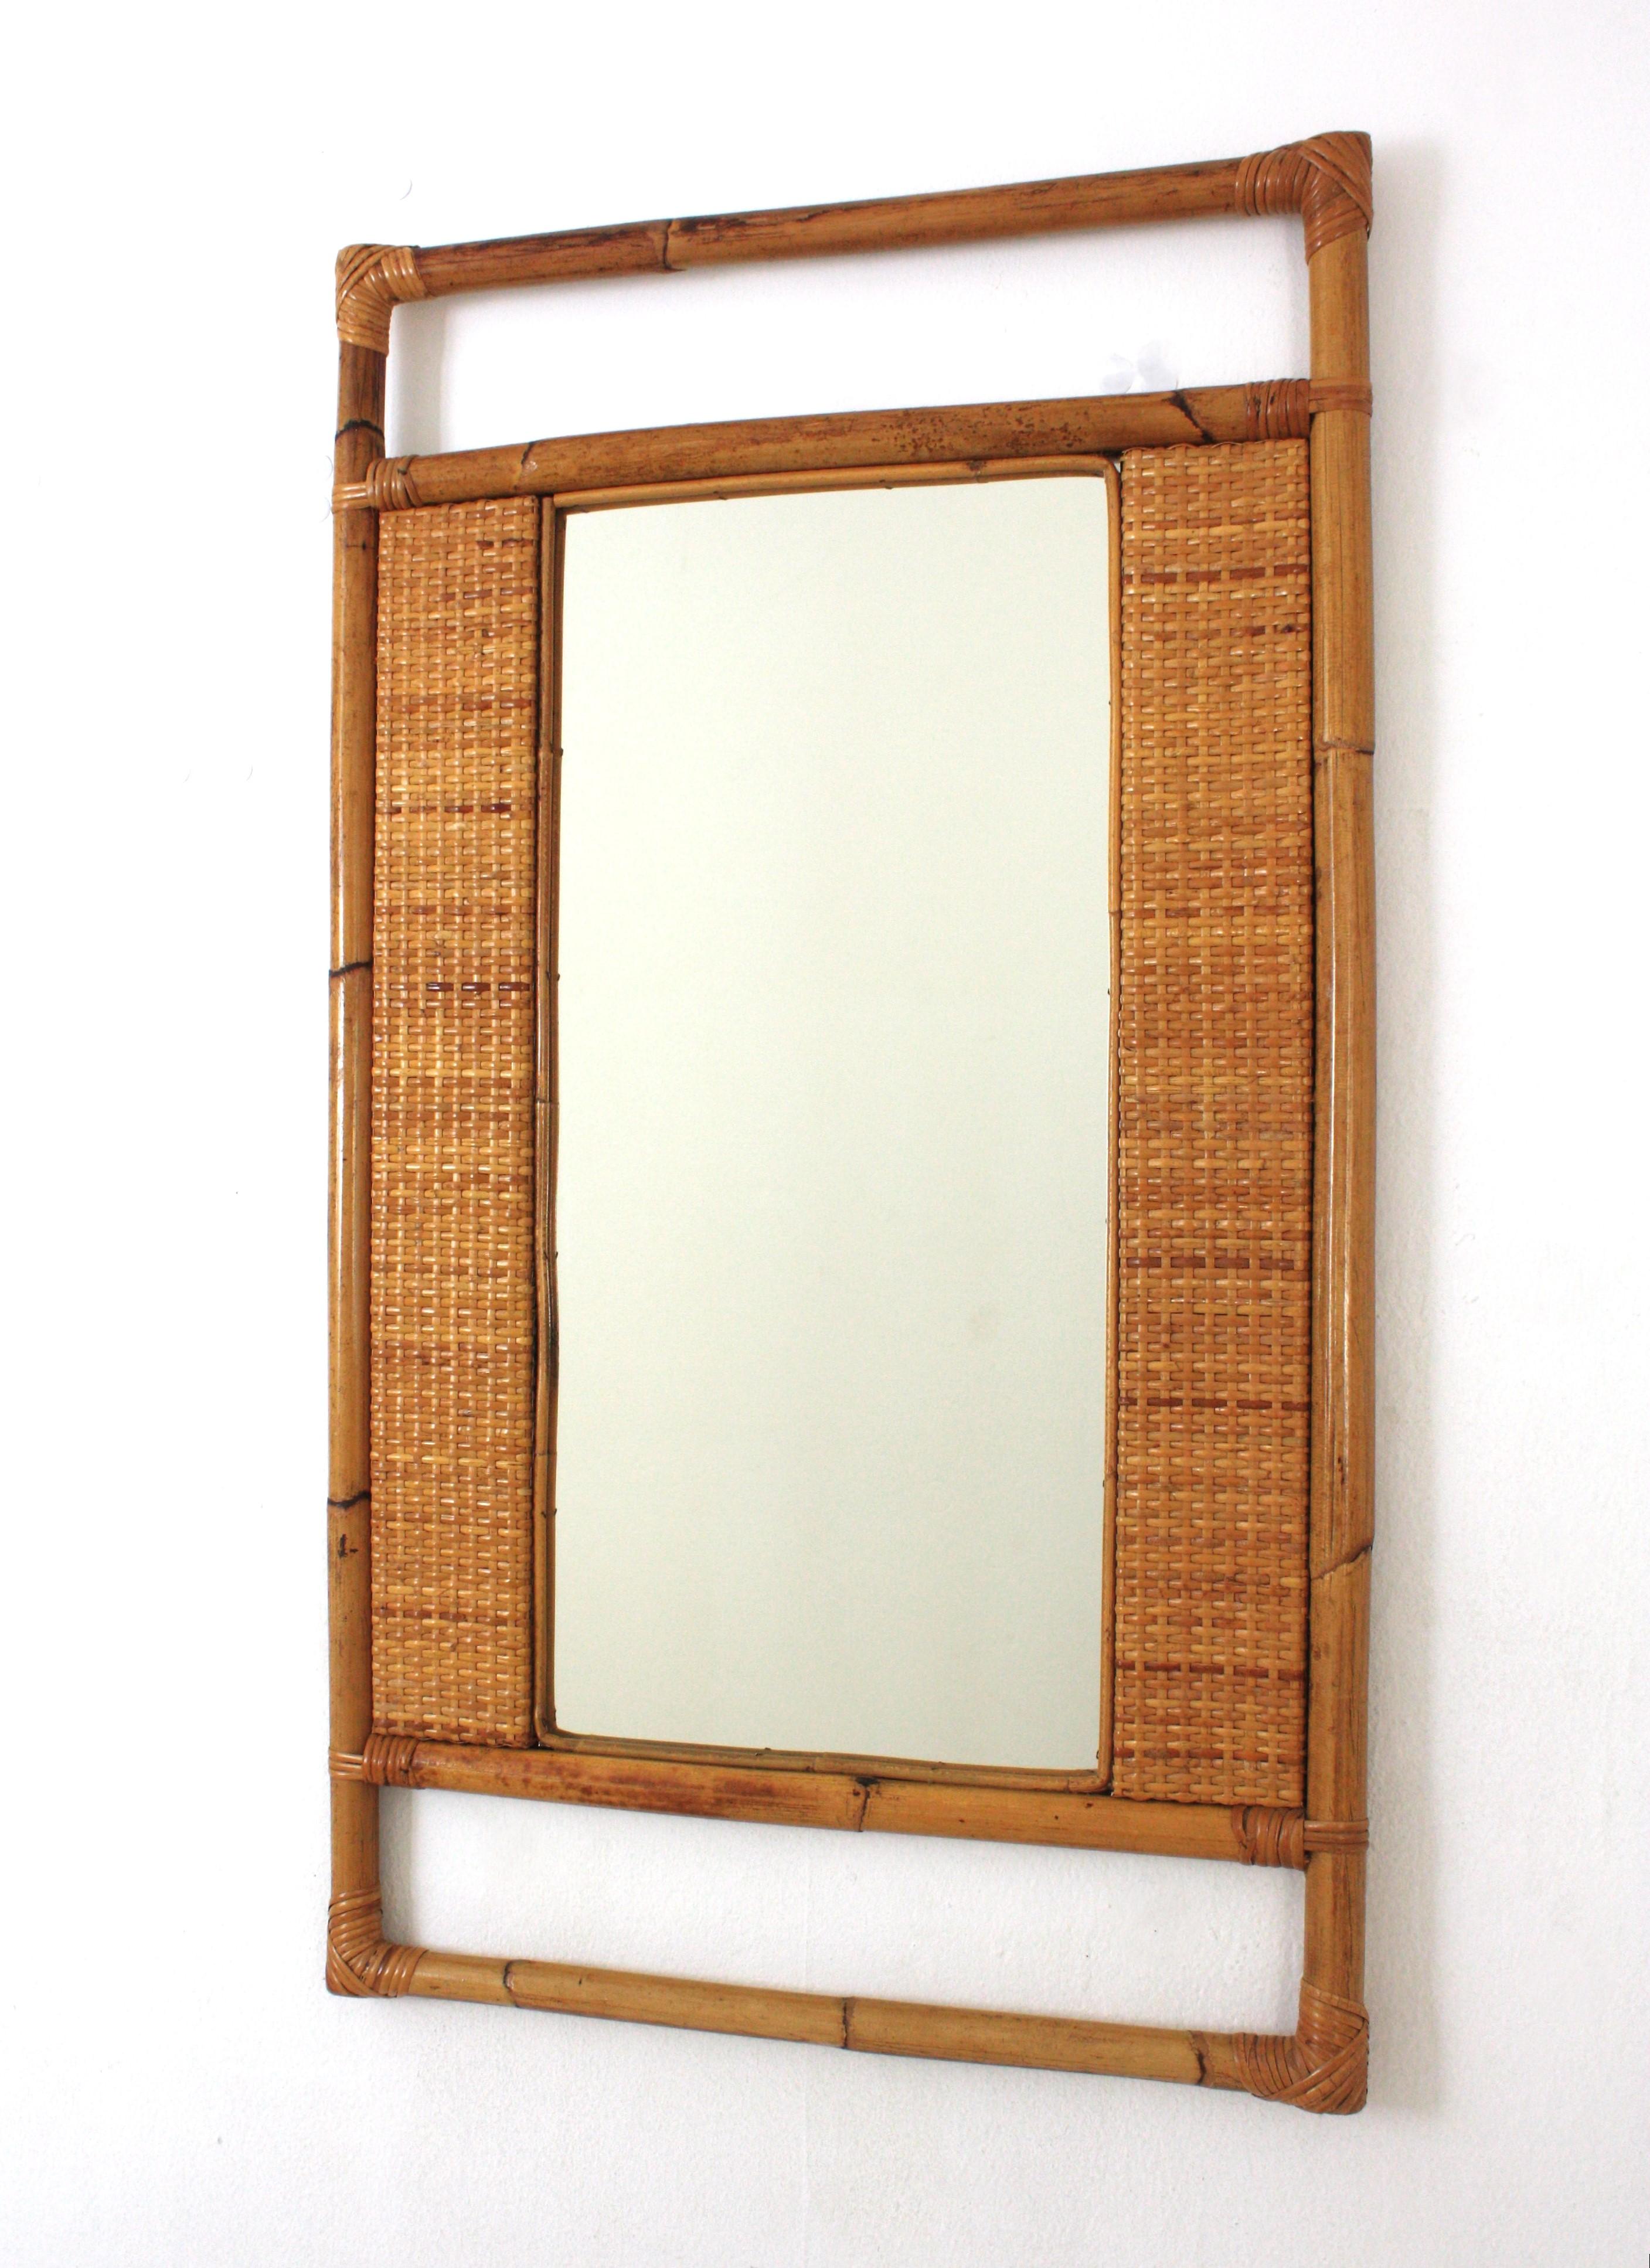 Bamboo Spanish Rectangular Rattan Wall Mirror with Geometric Woven Frame For Sale